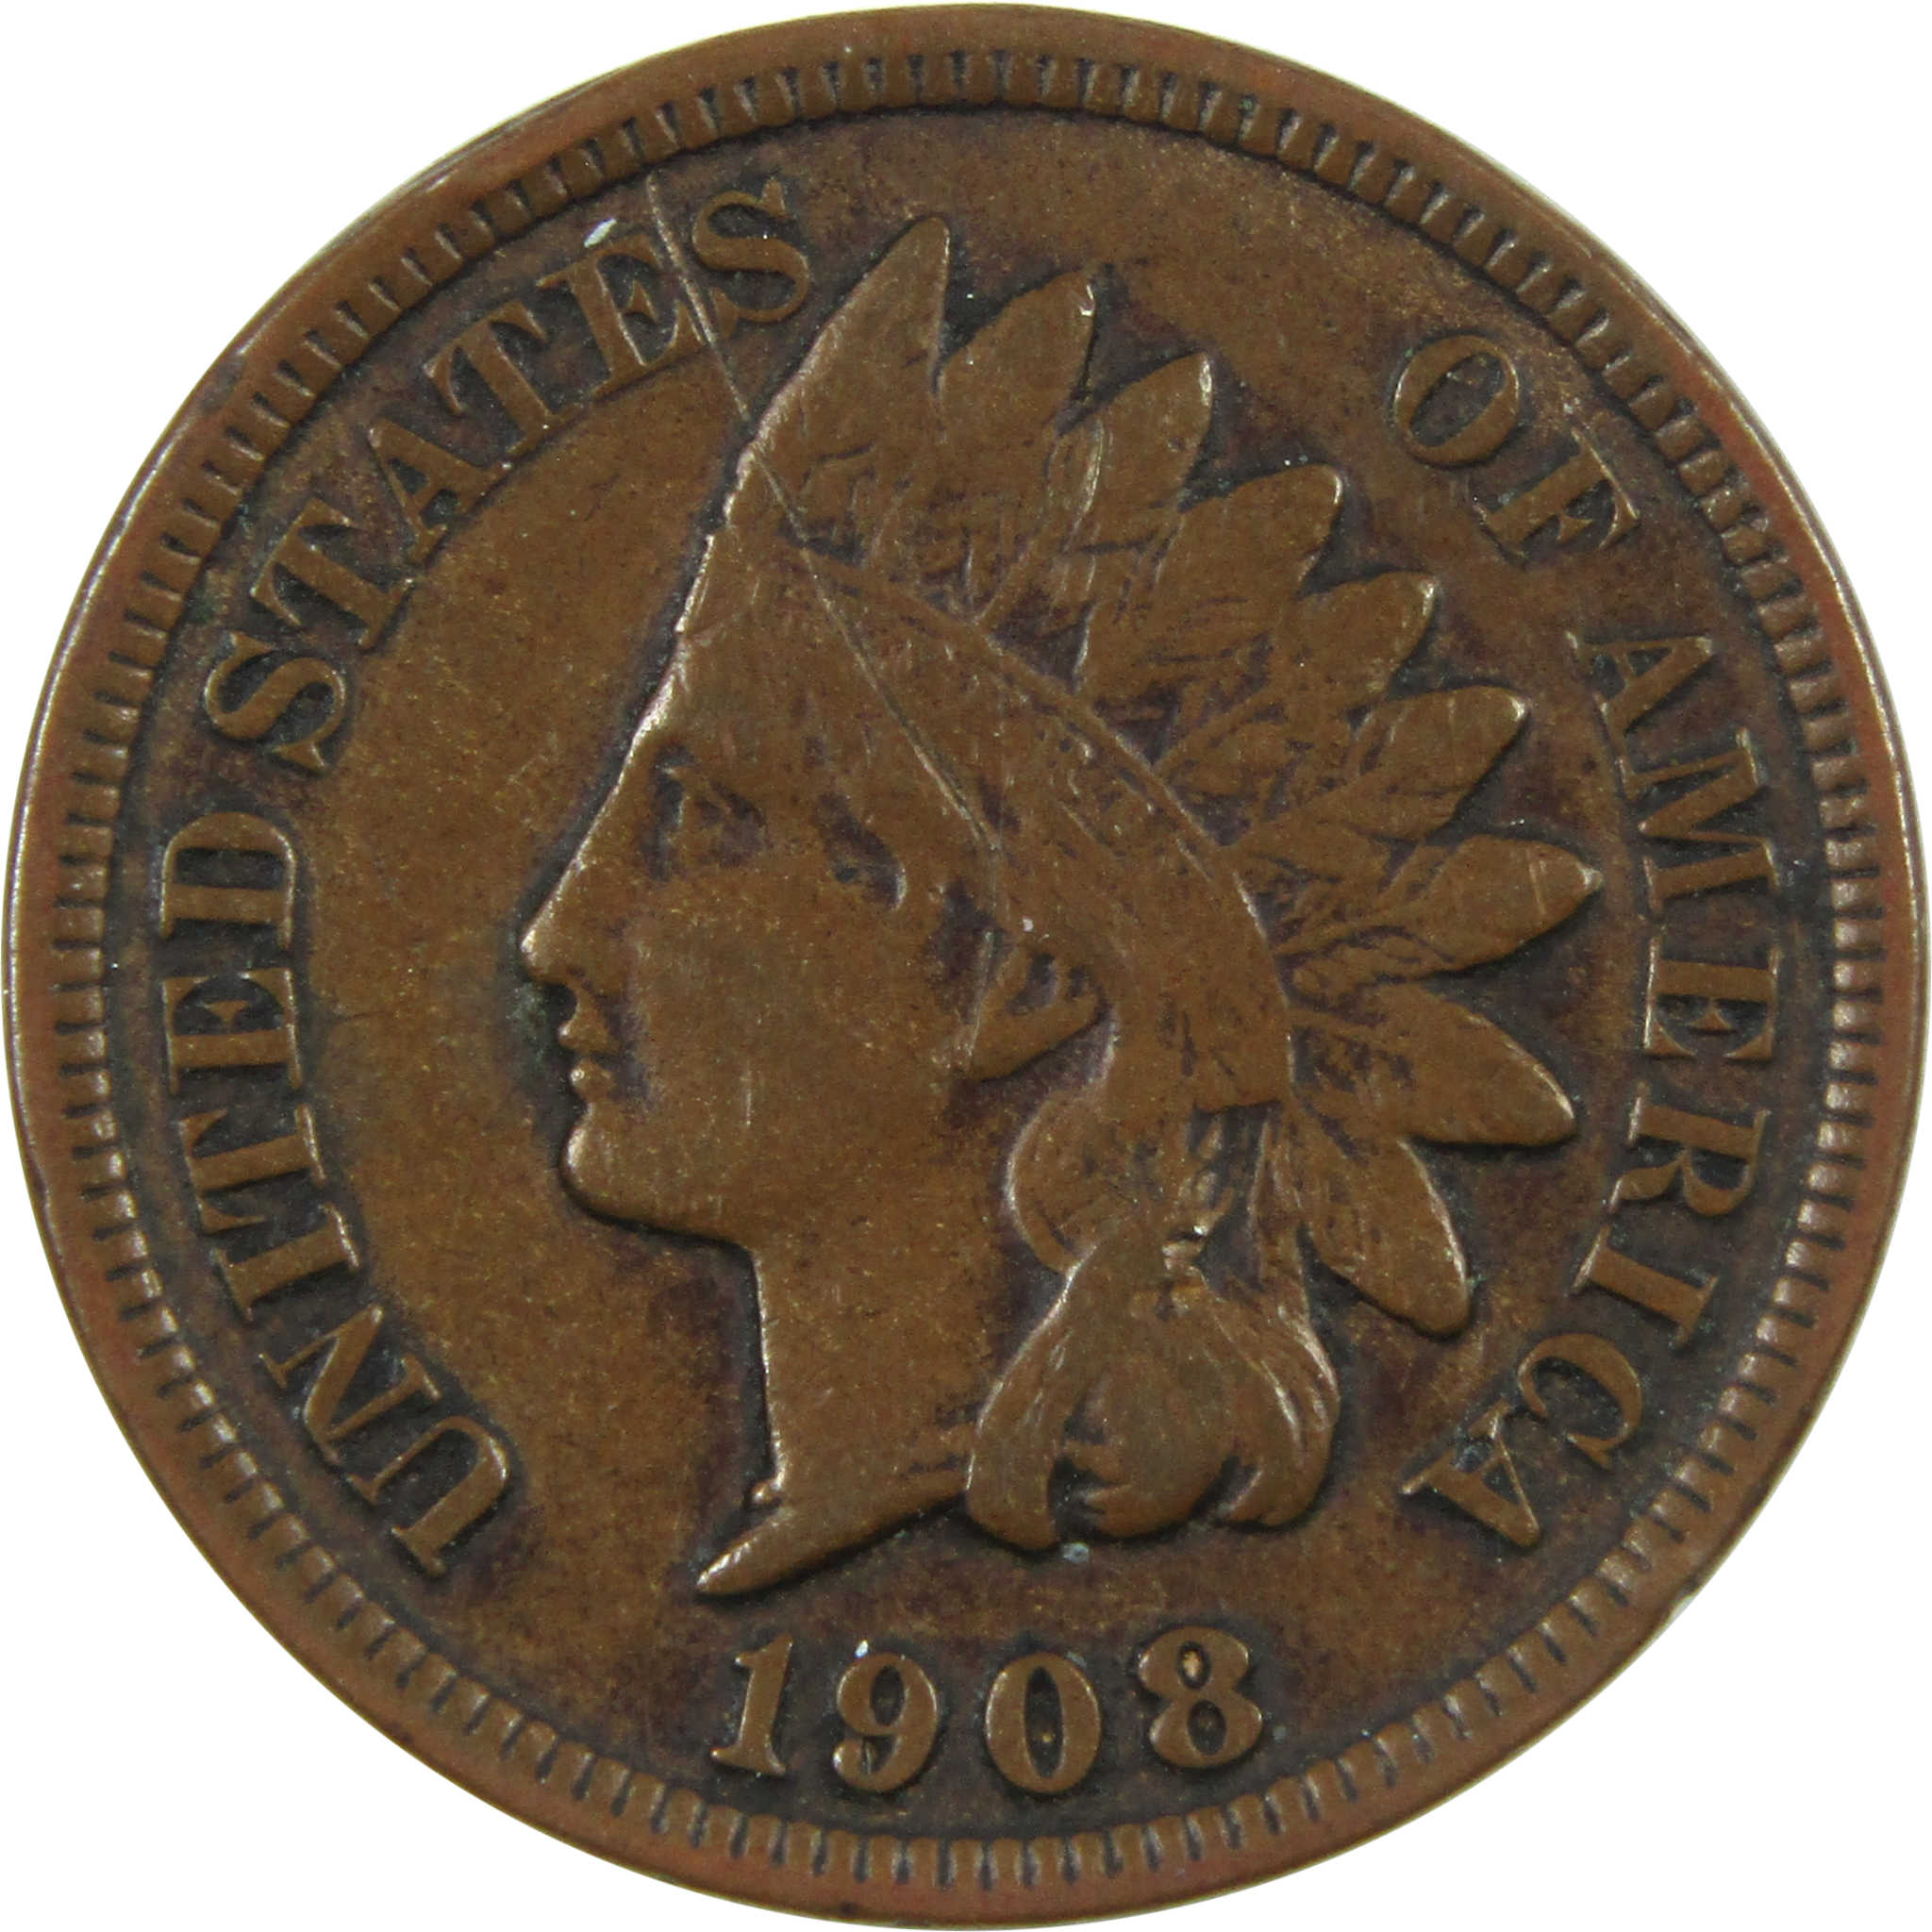 1908 S Indian Head Cent VF Very Fine Penny 1c Coin SKU:I14054